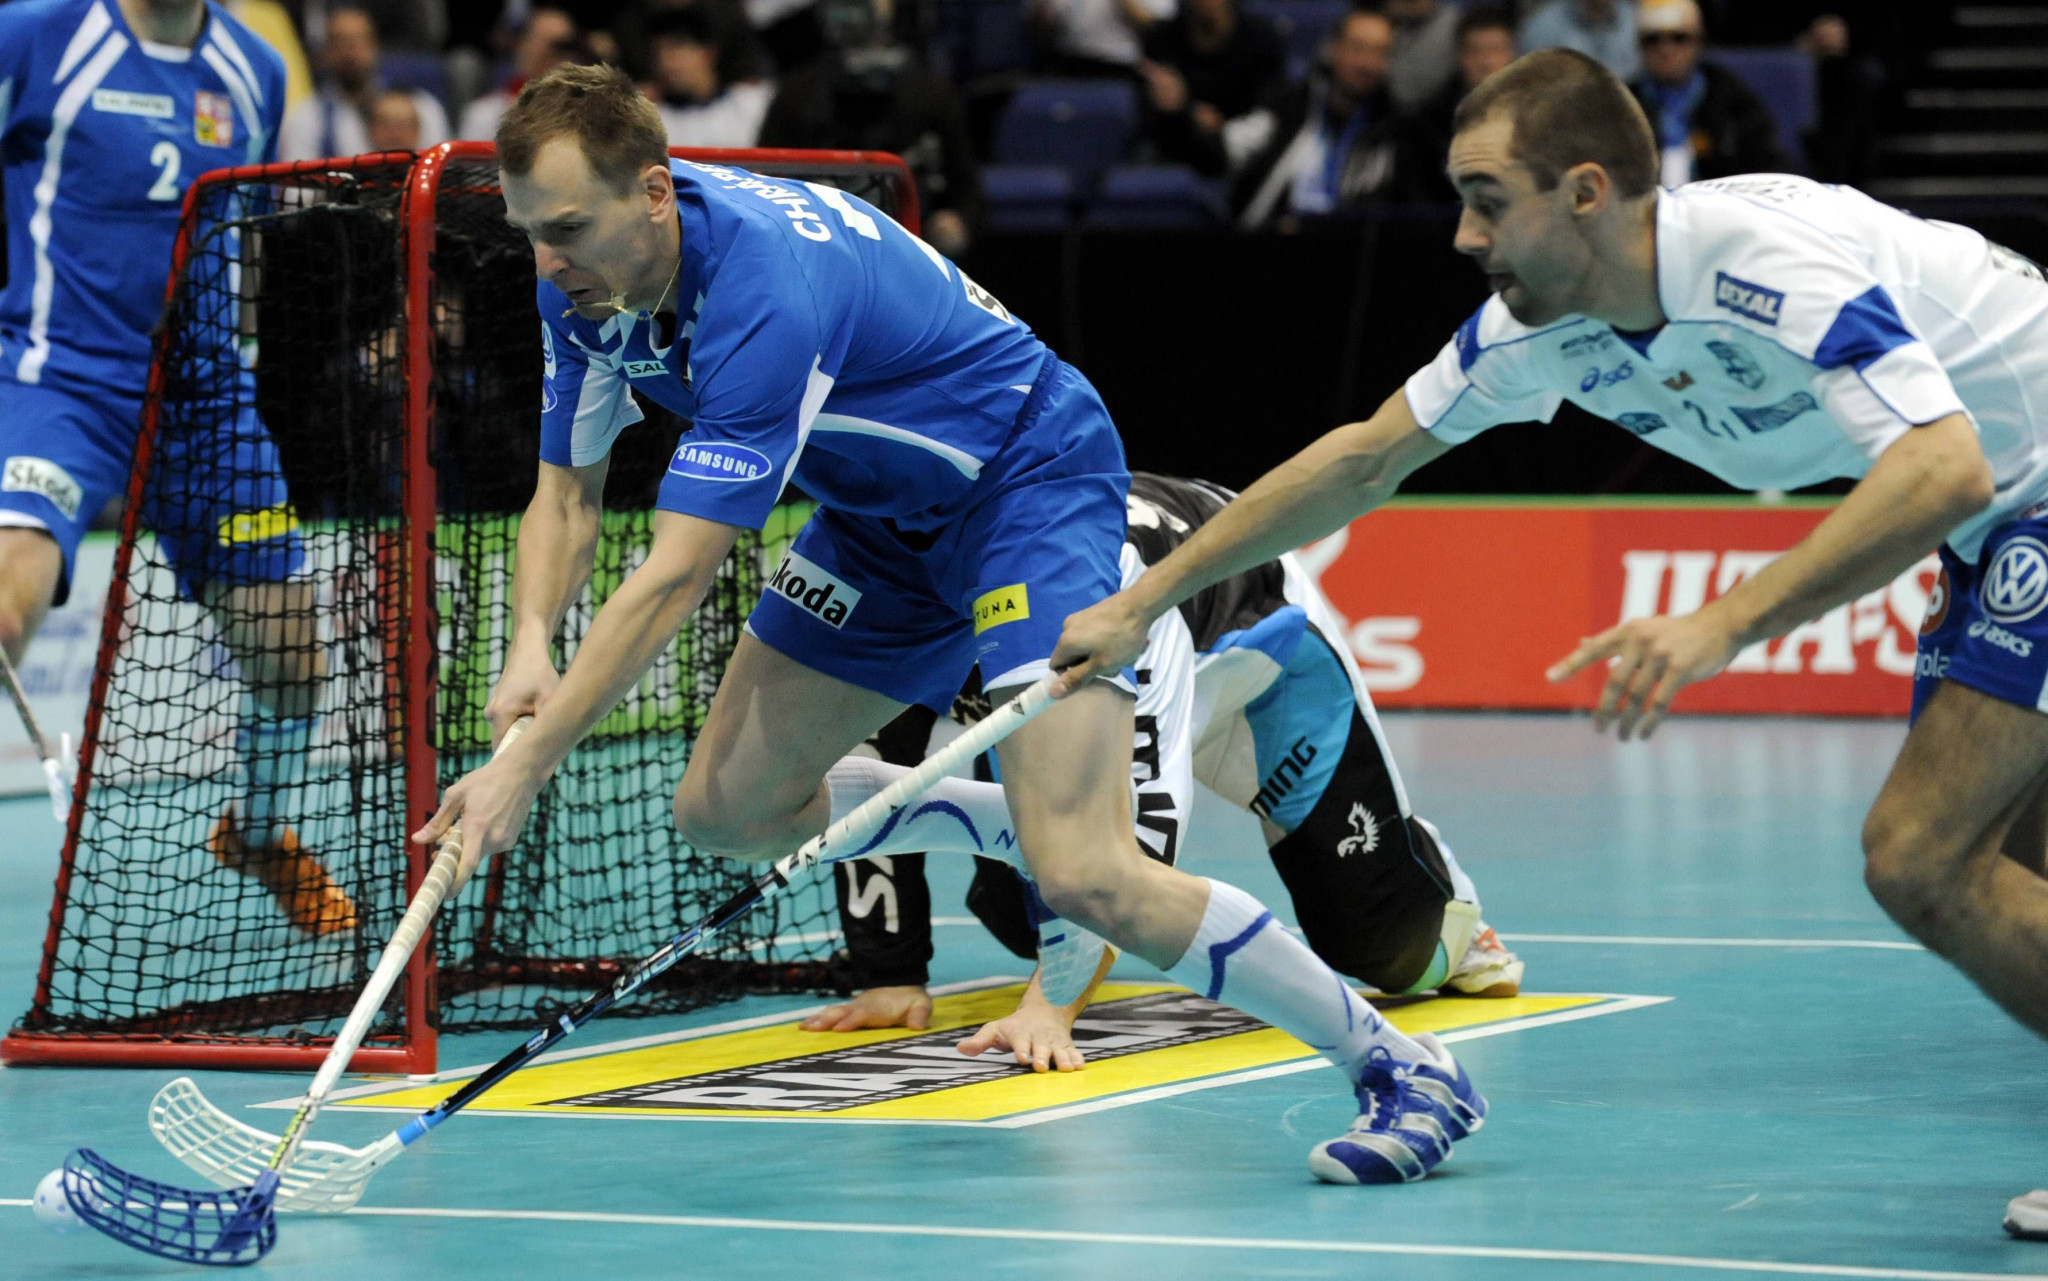 Floorball is one of the sports contested at The World Games ©Getty Images